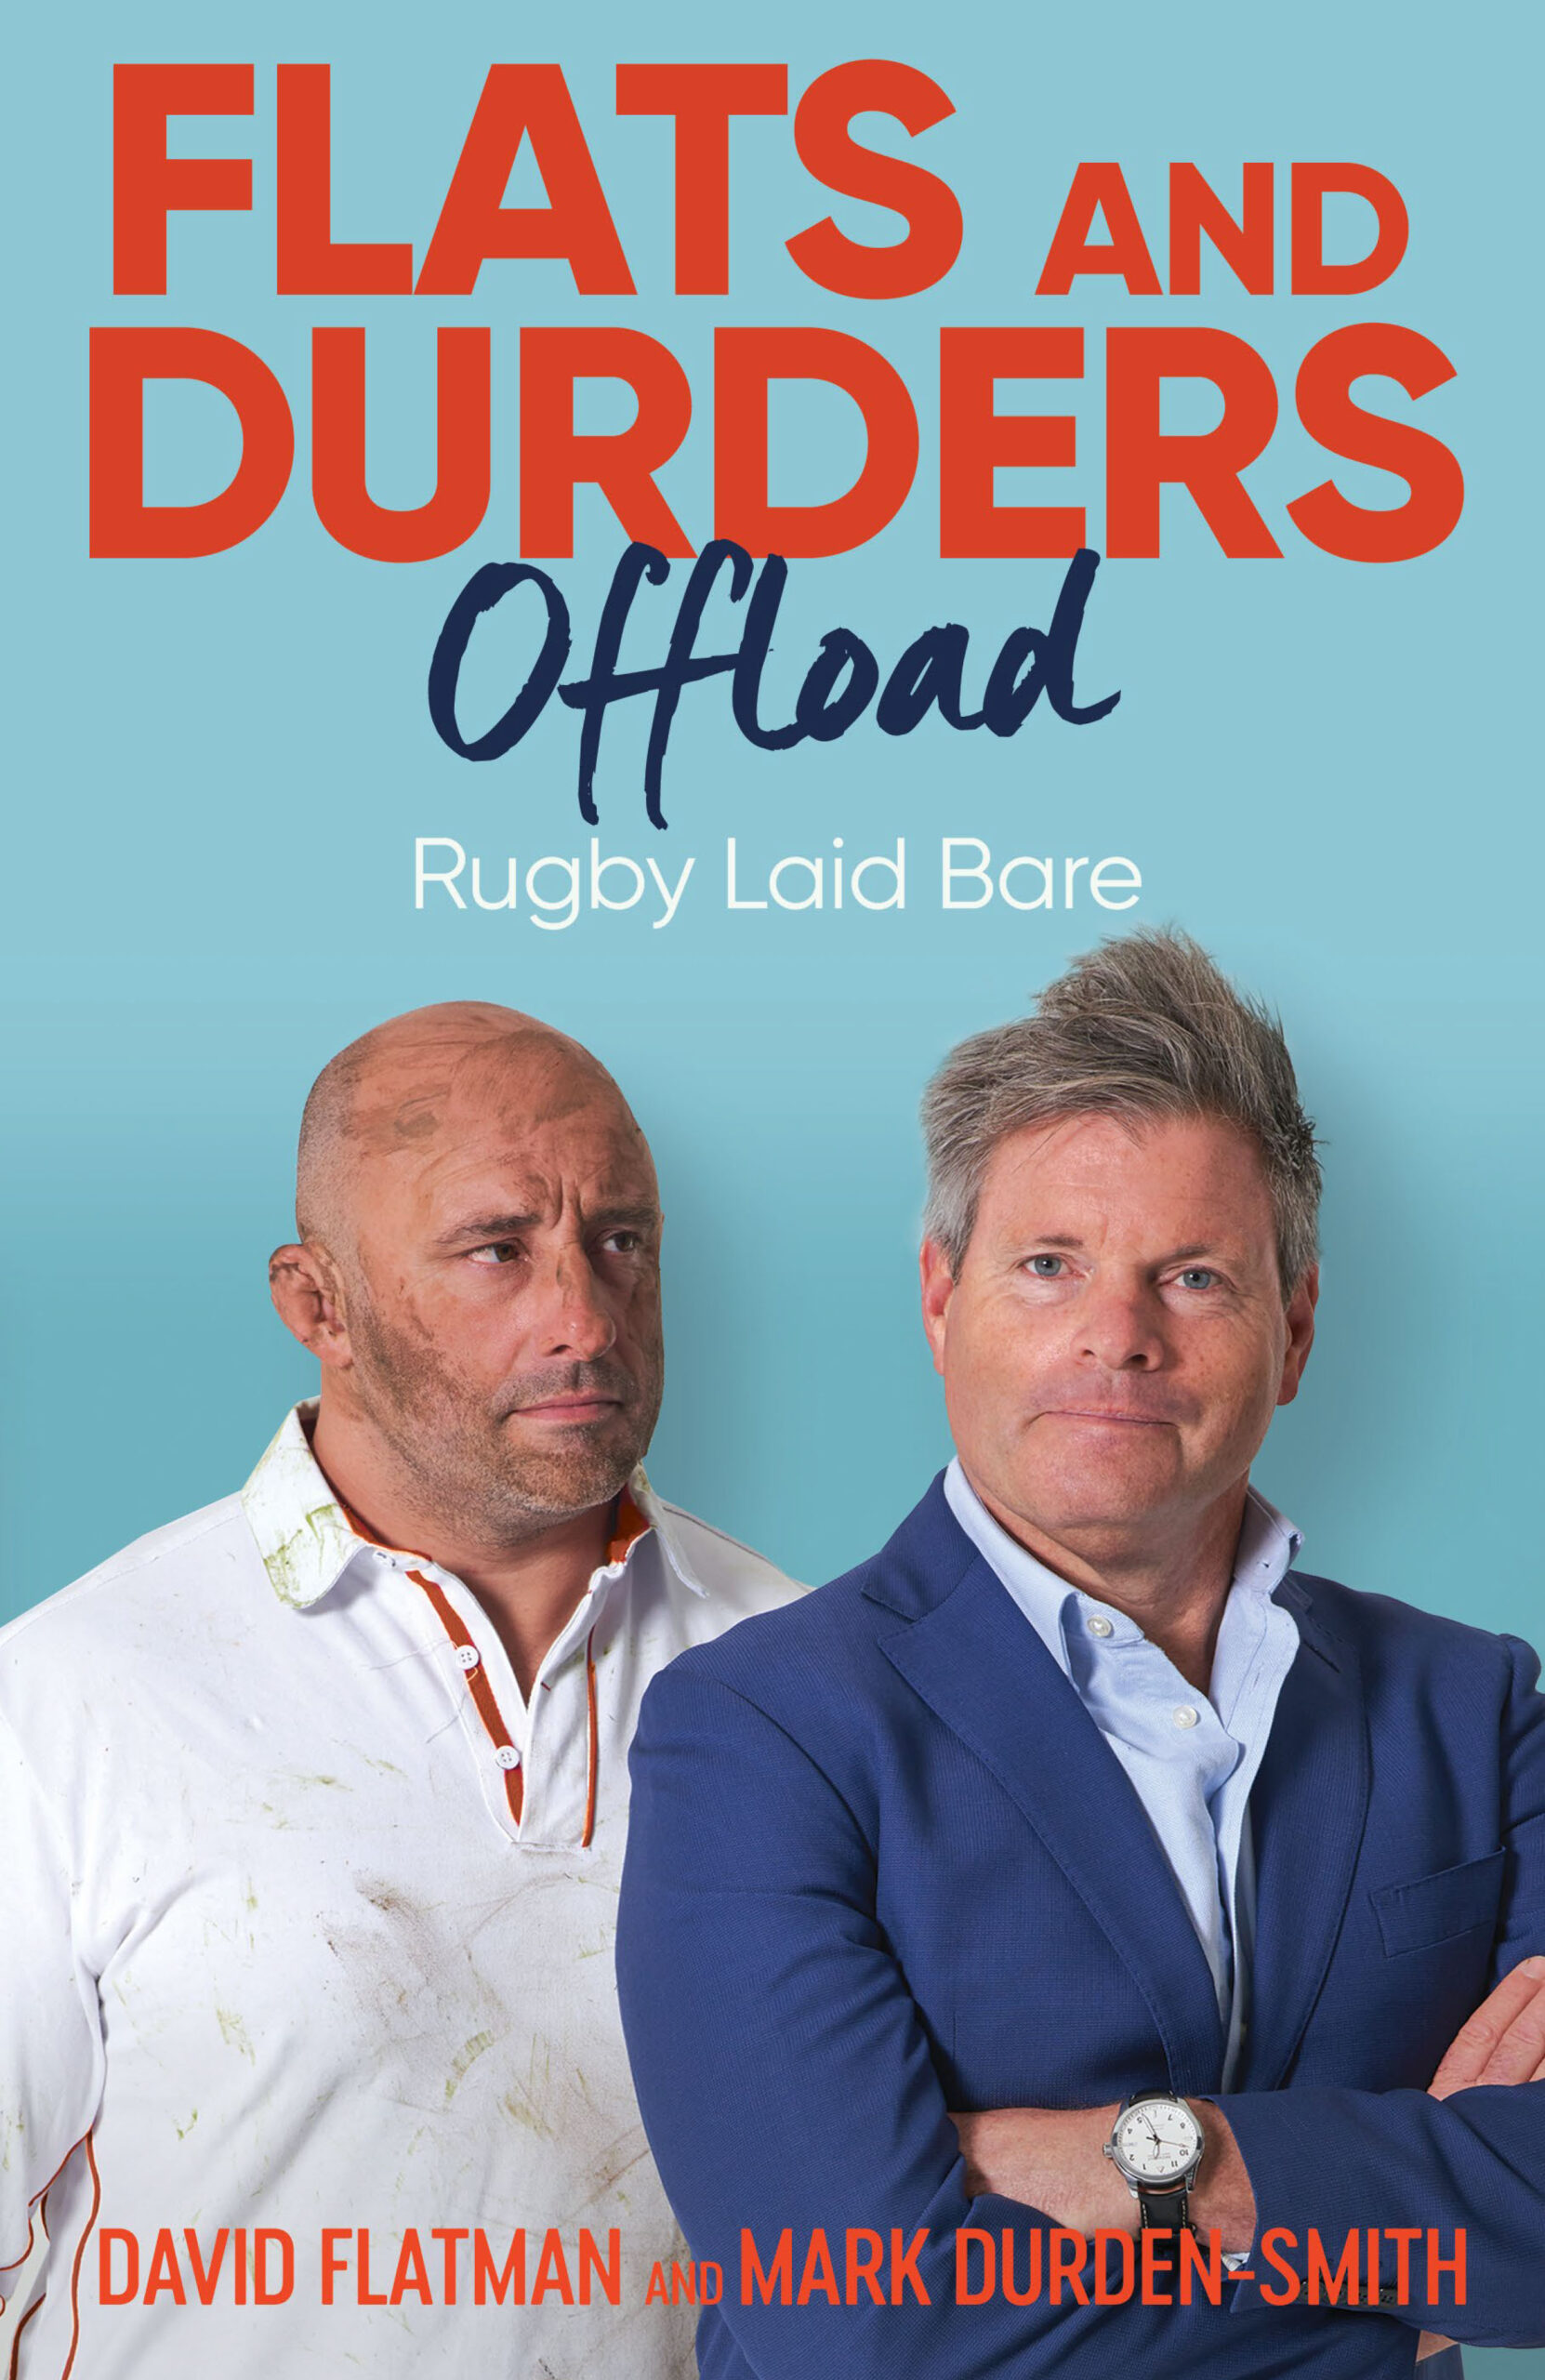 Flats and Durders by David Flatman and Mark Durden-Smith